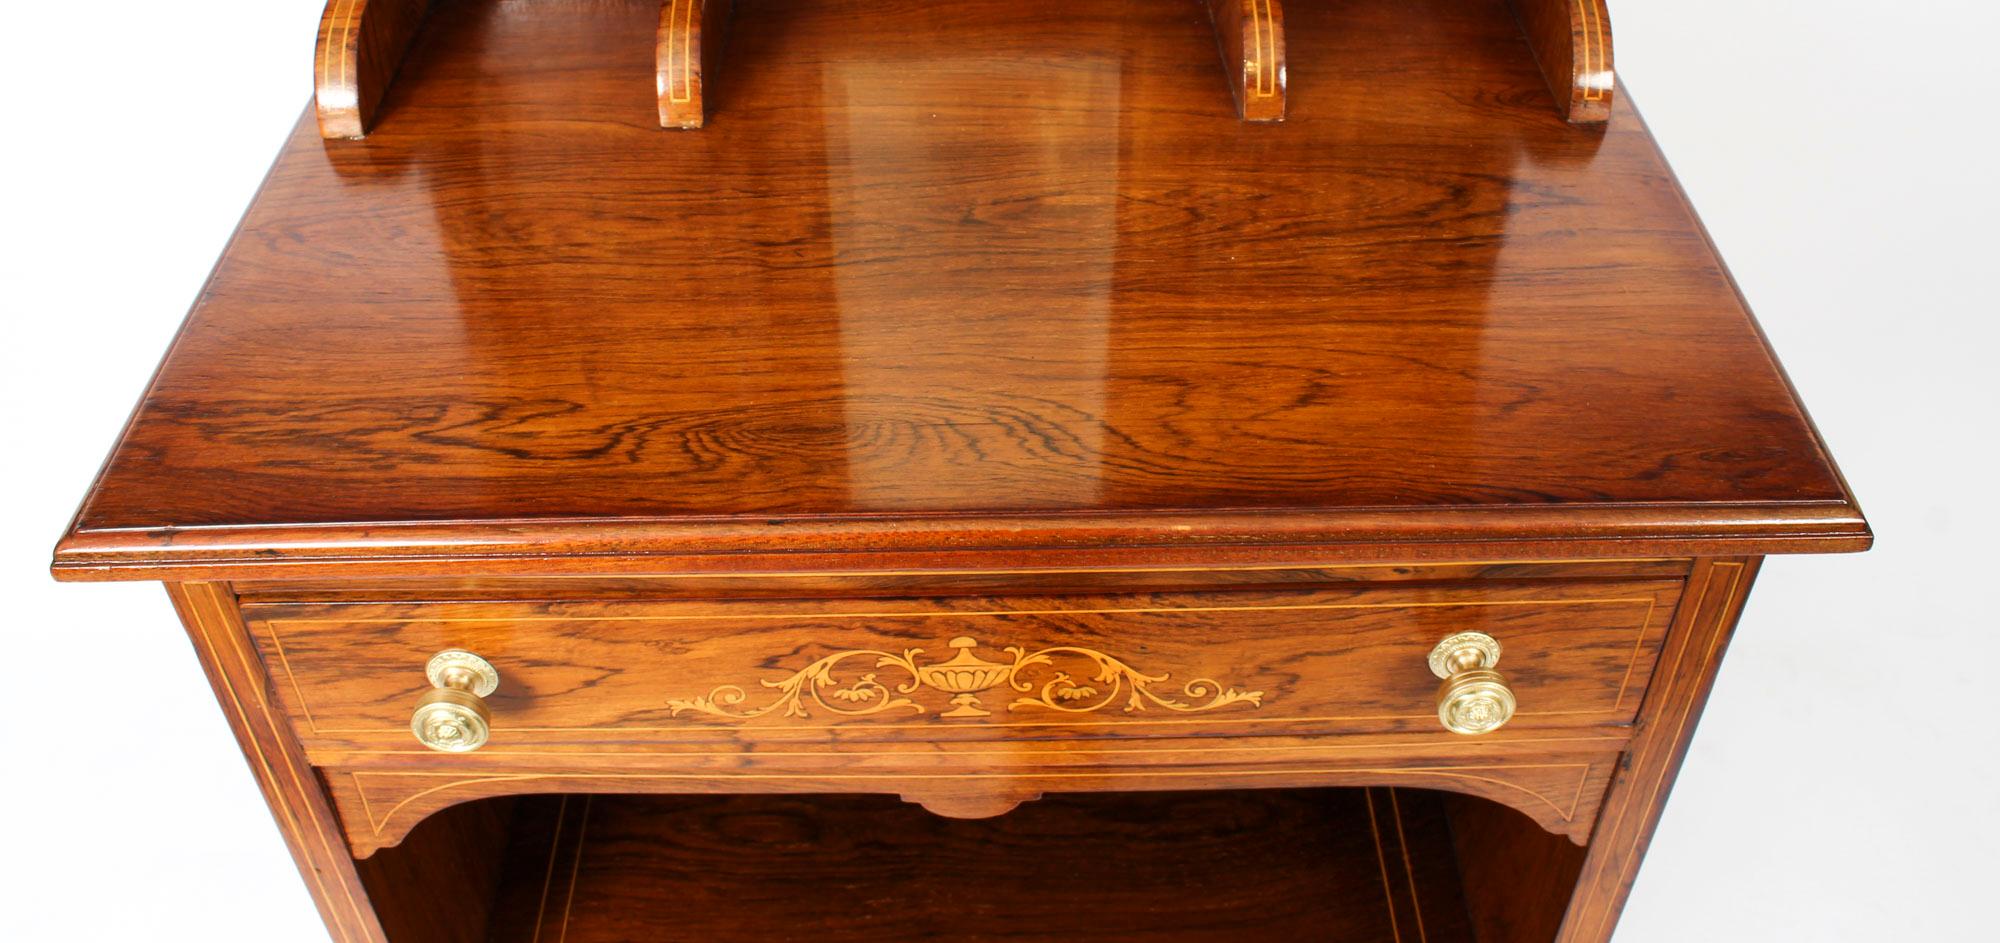 Antique Edwardian Gonçalo Alves Marquetry Inlaid Music Cabinet 19th Century In Good Condition For Sale In London, GB